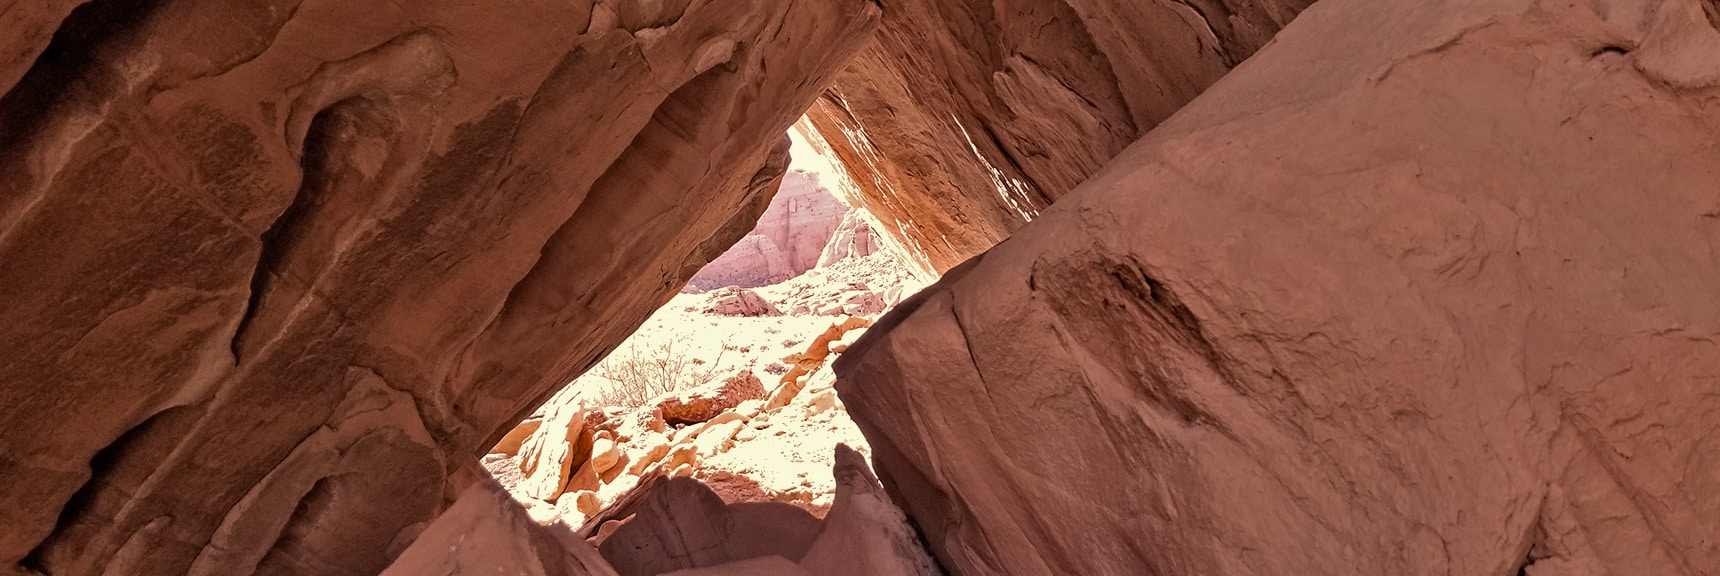 Viewing the Bowl Through Intricate Rock Passages | Bowl of Fire, Lake Mead National Recreation Area, Nevada